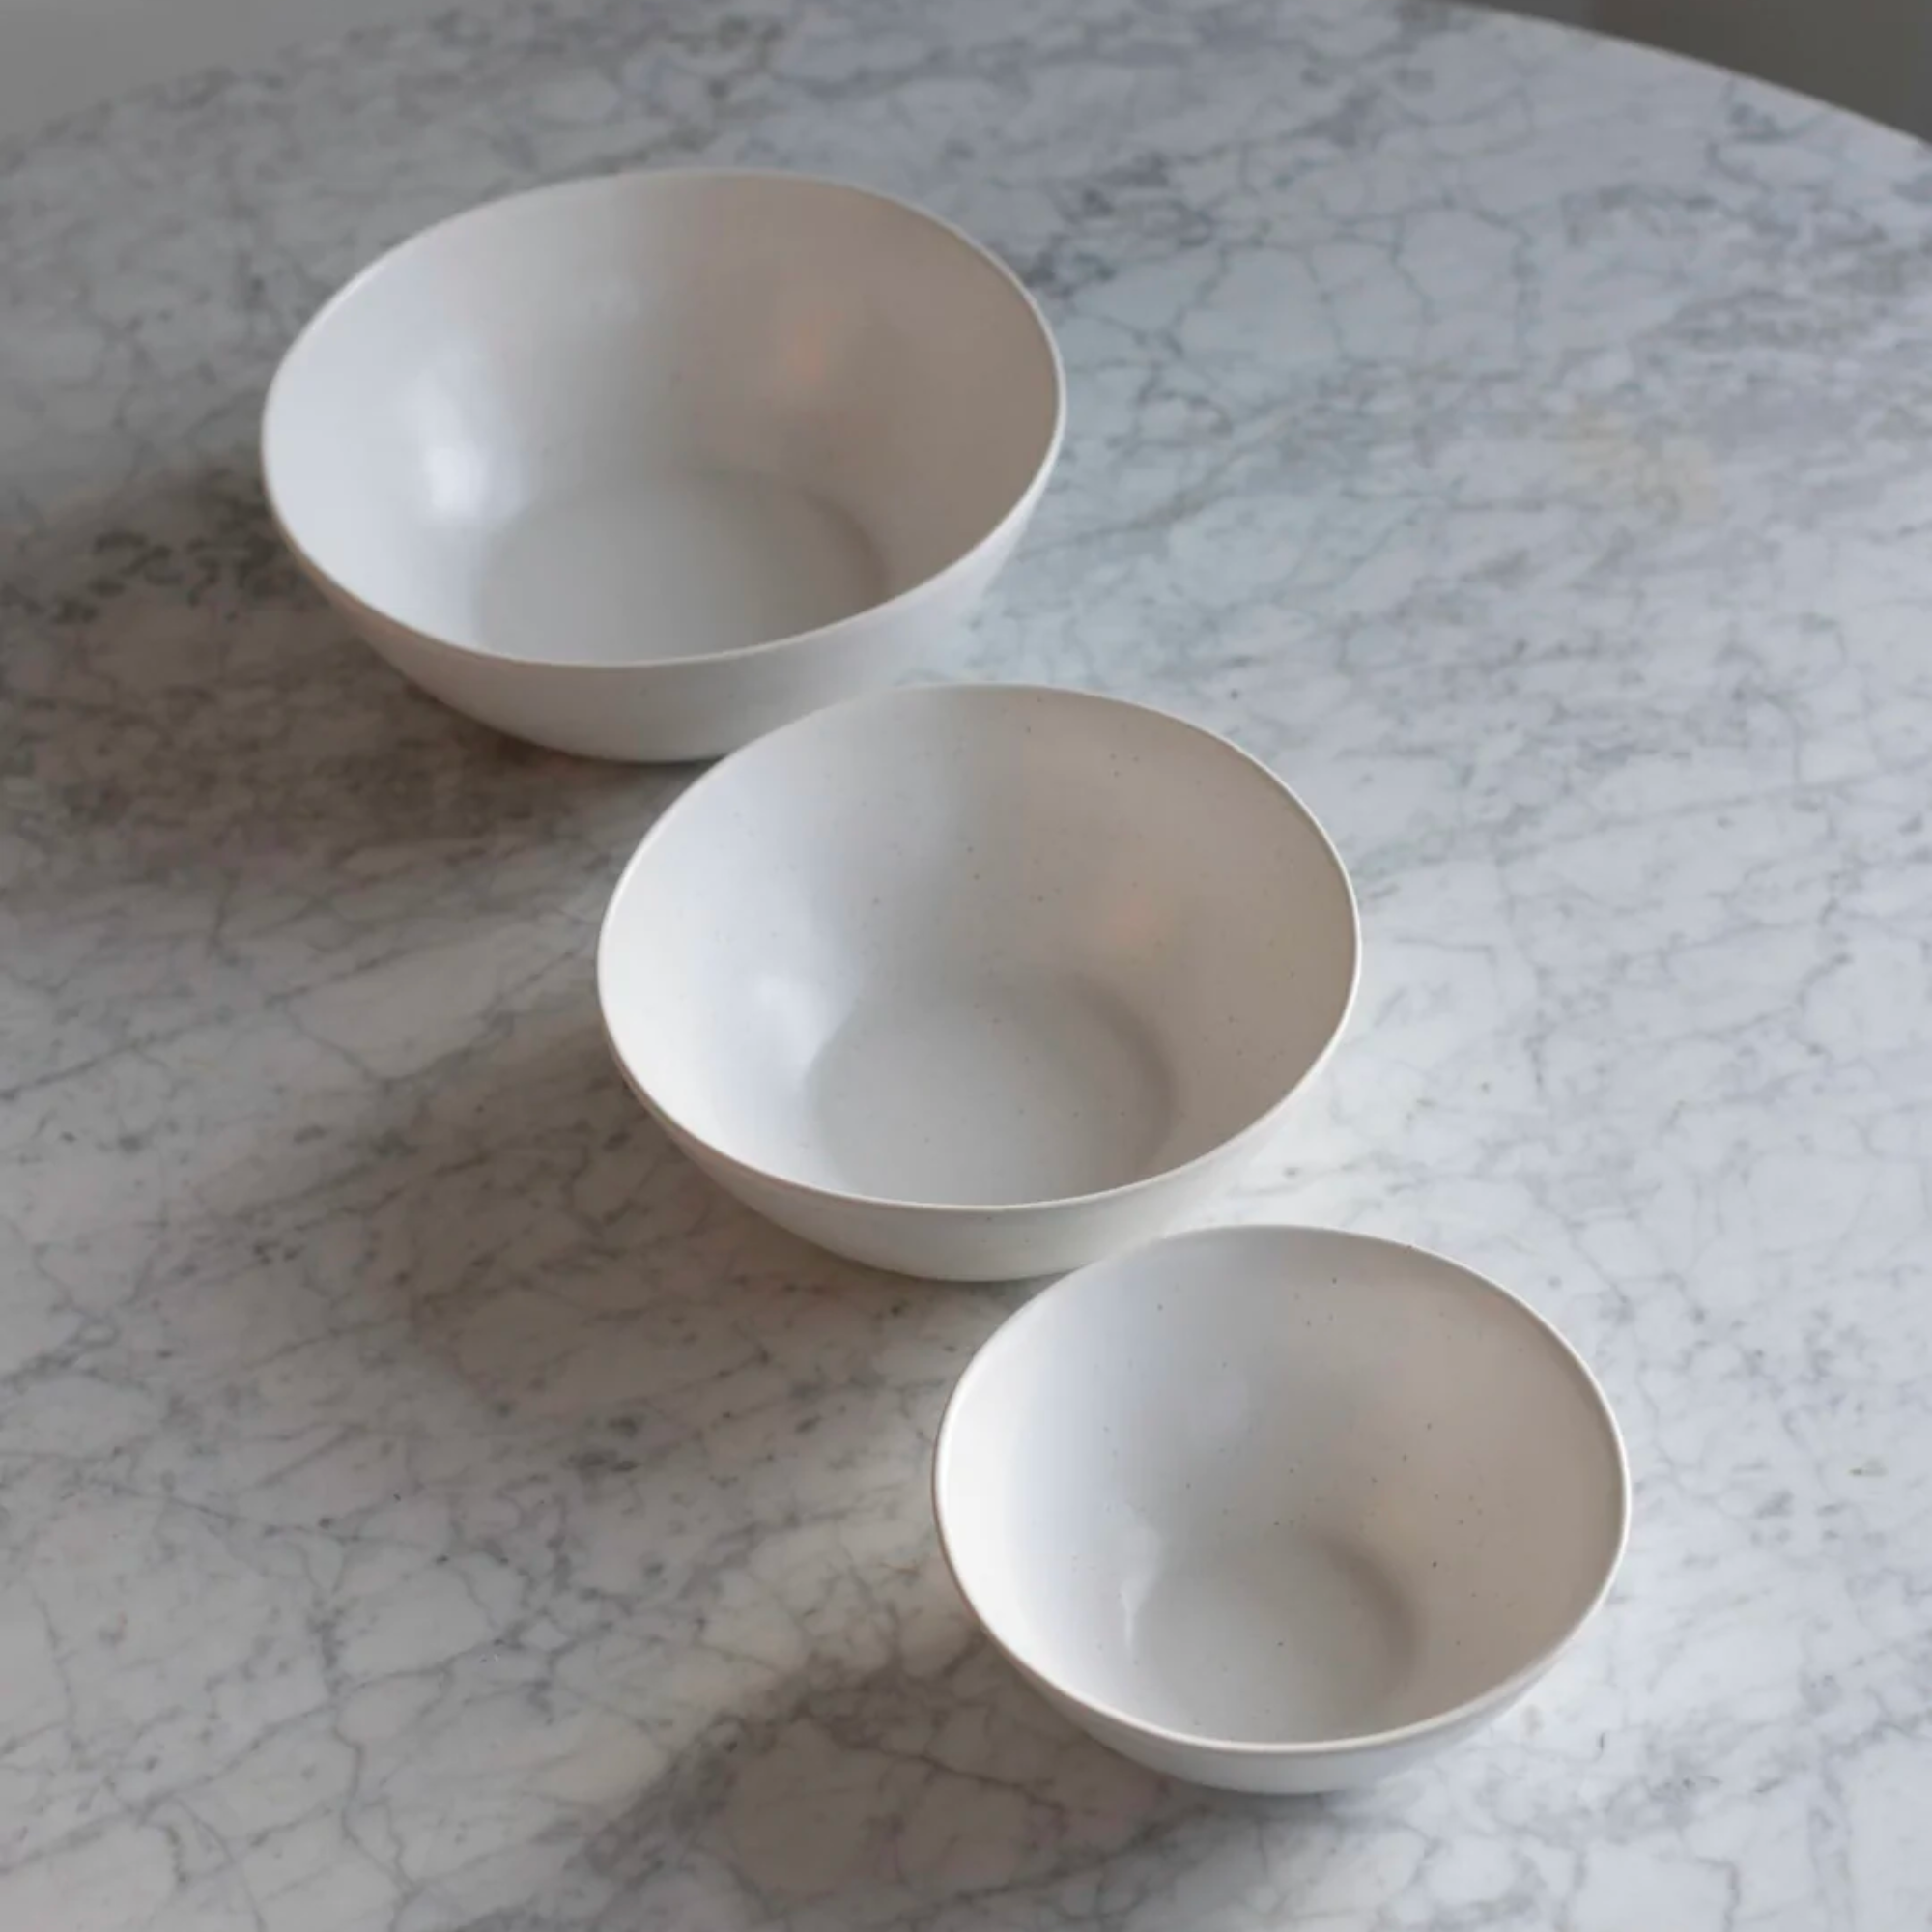 Fable Nested Serving Bowls - Speckled White